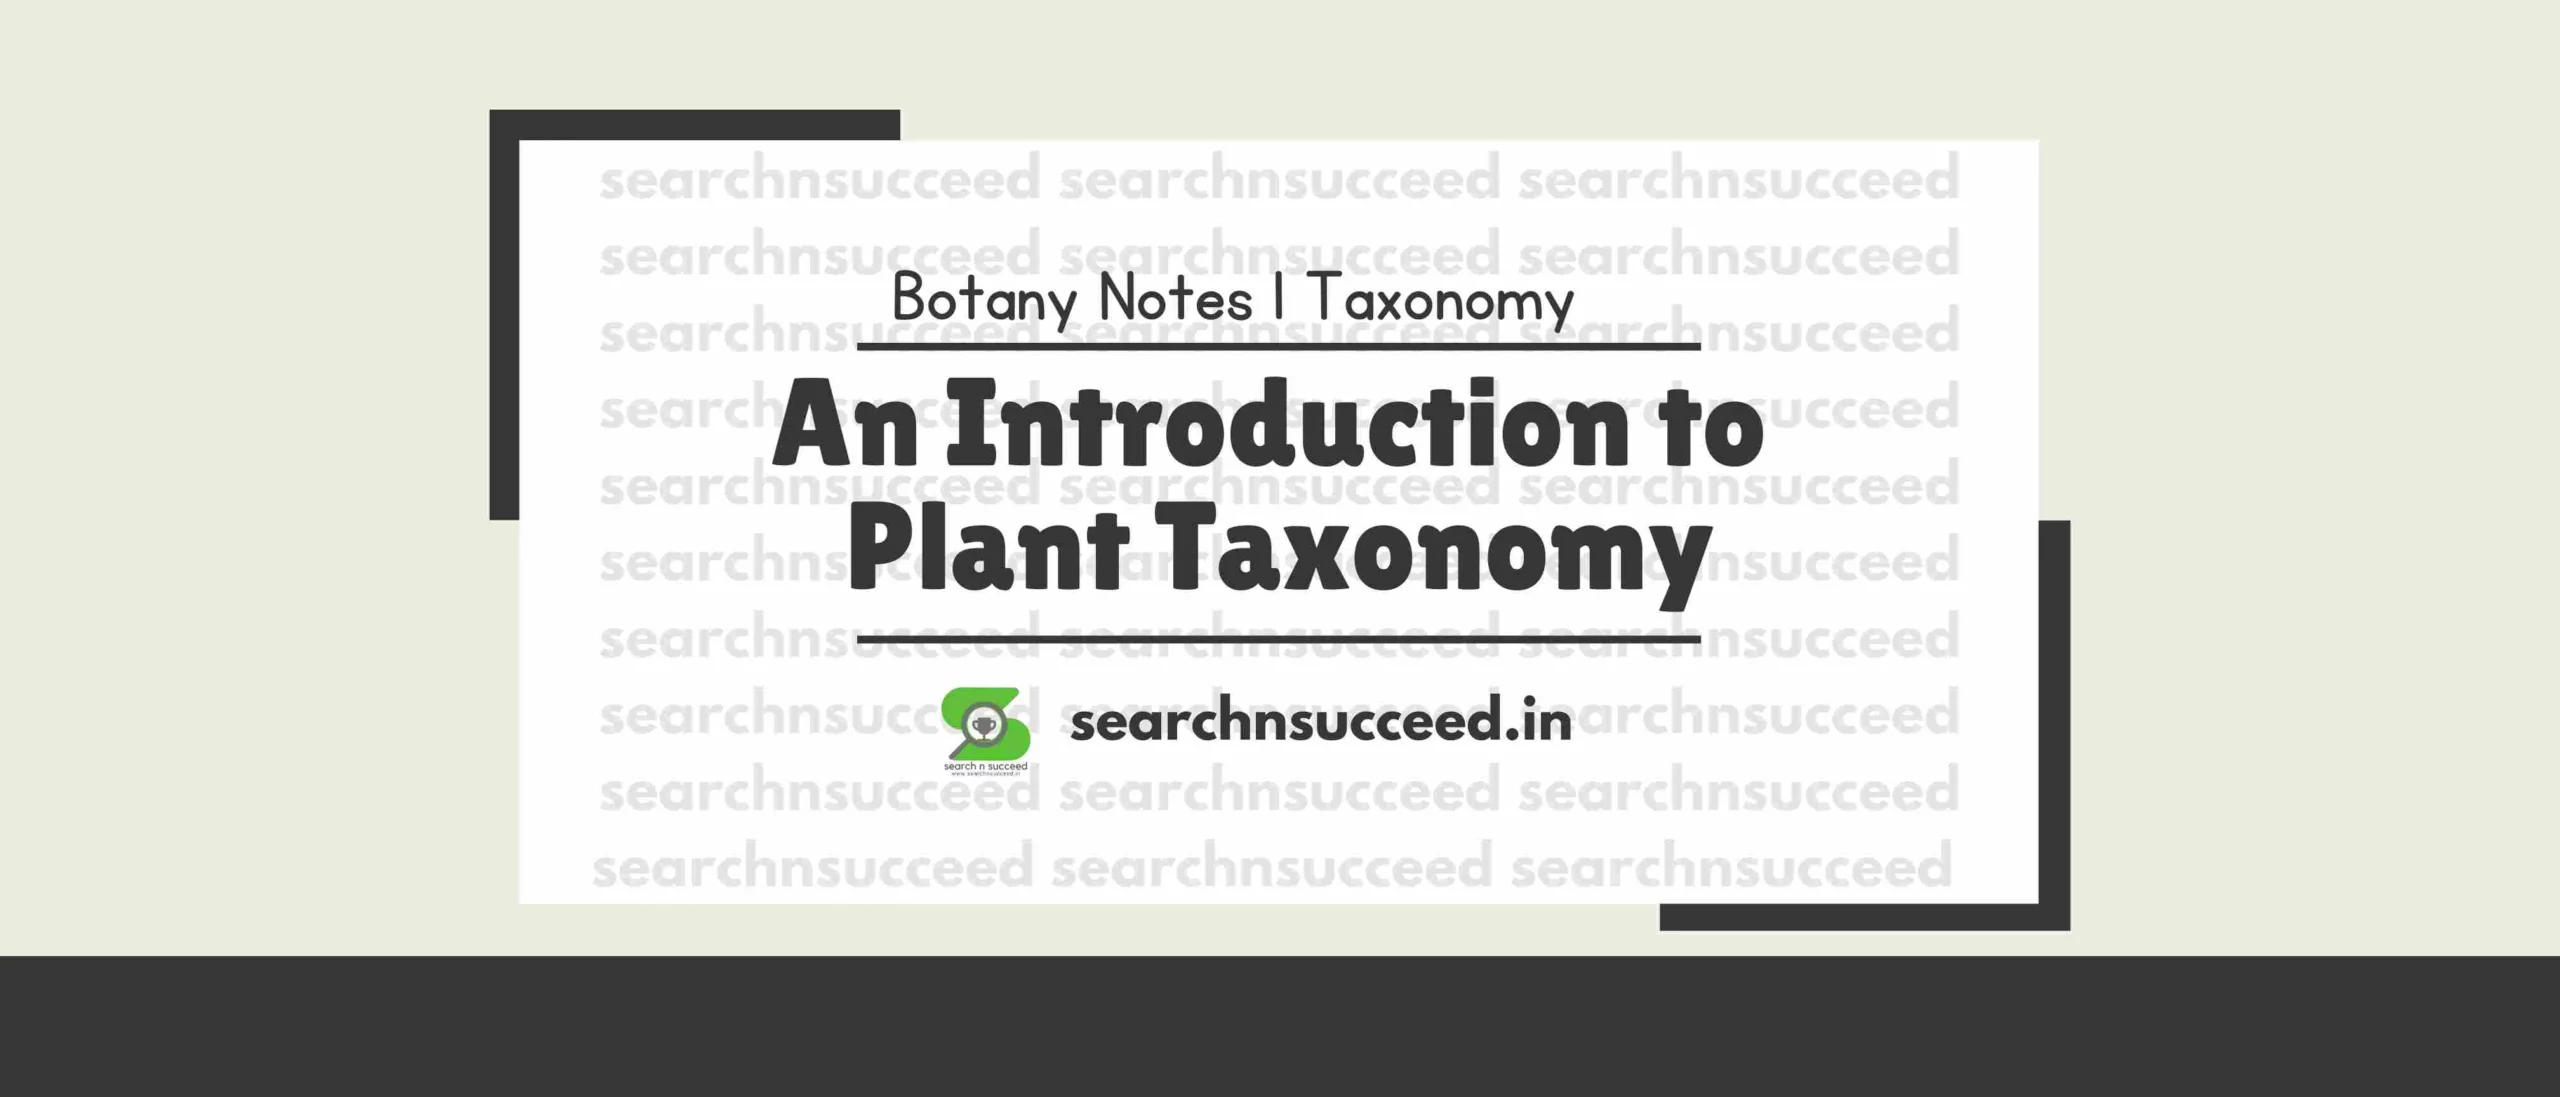 An Introduction to Plant Taxonomy